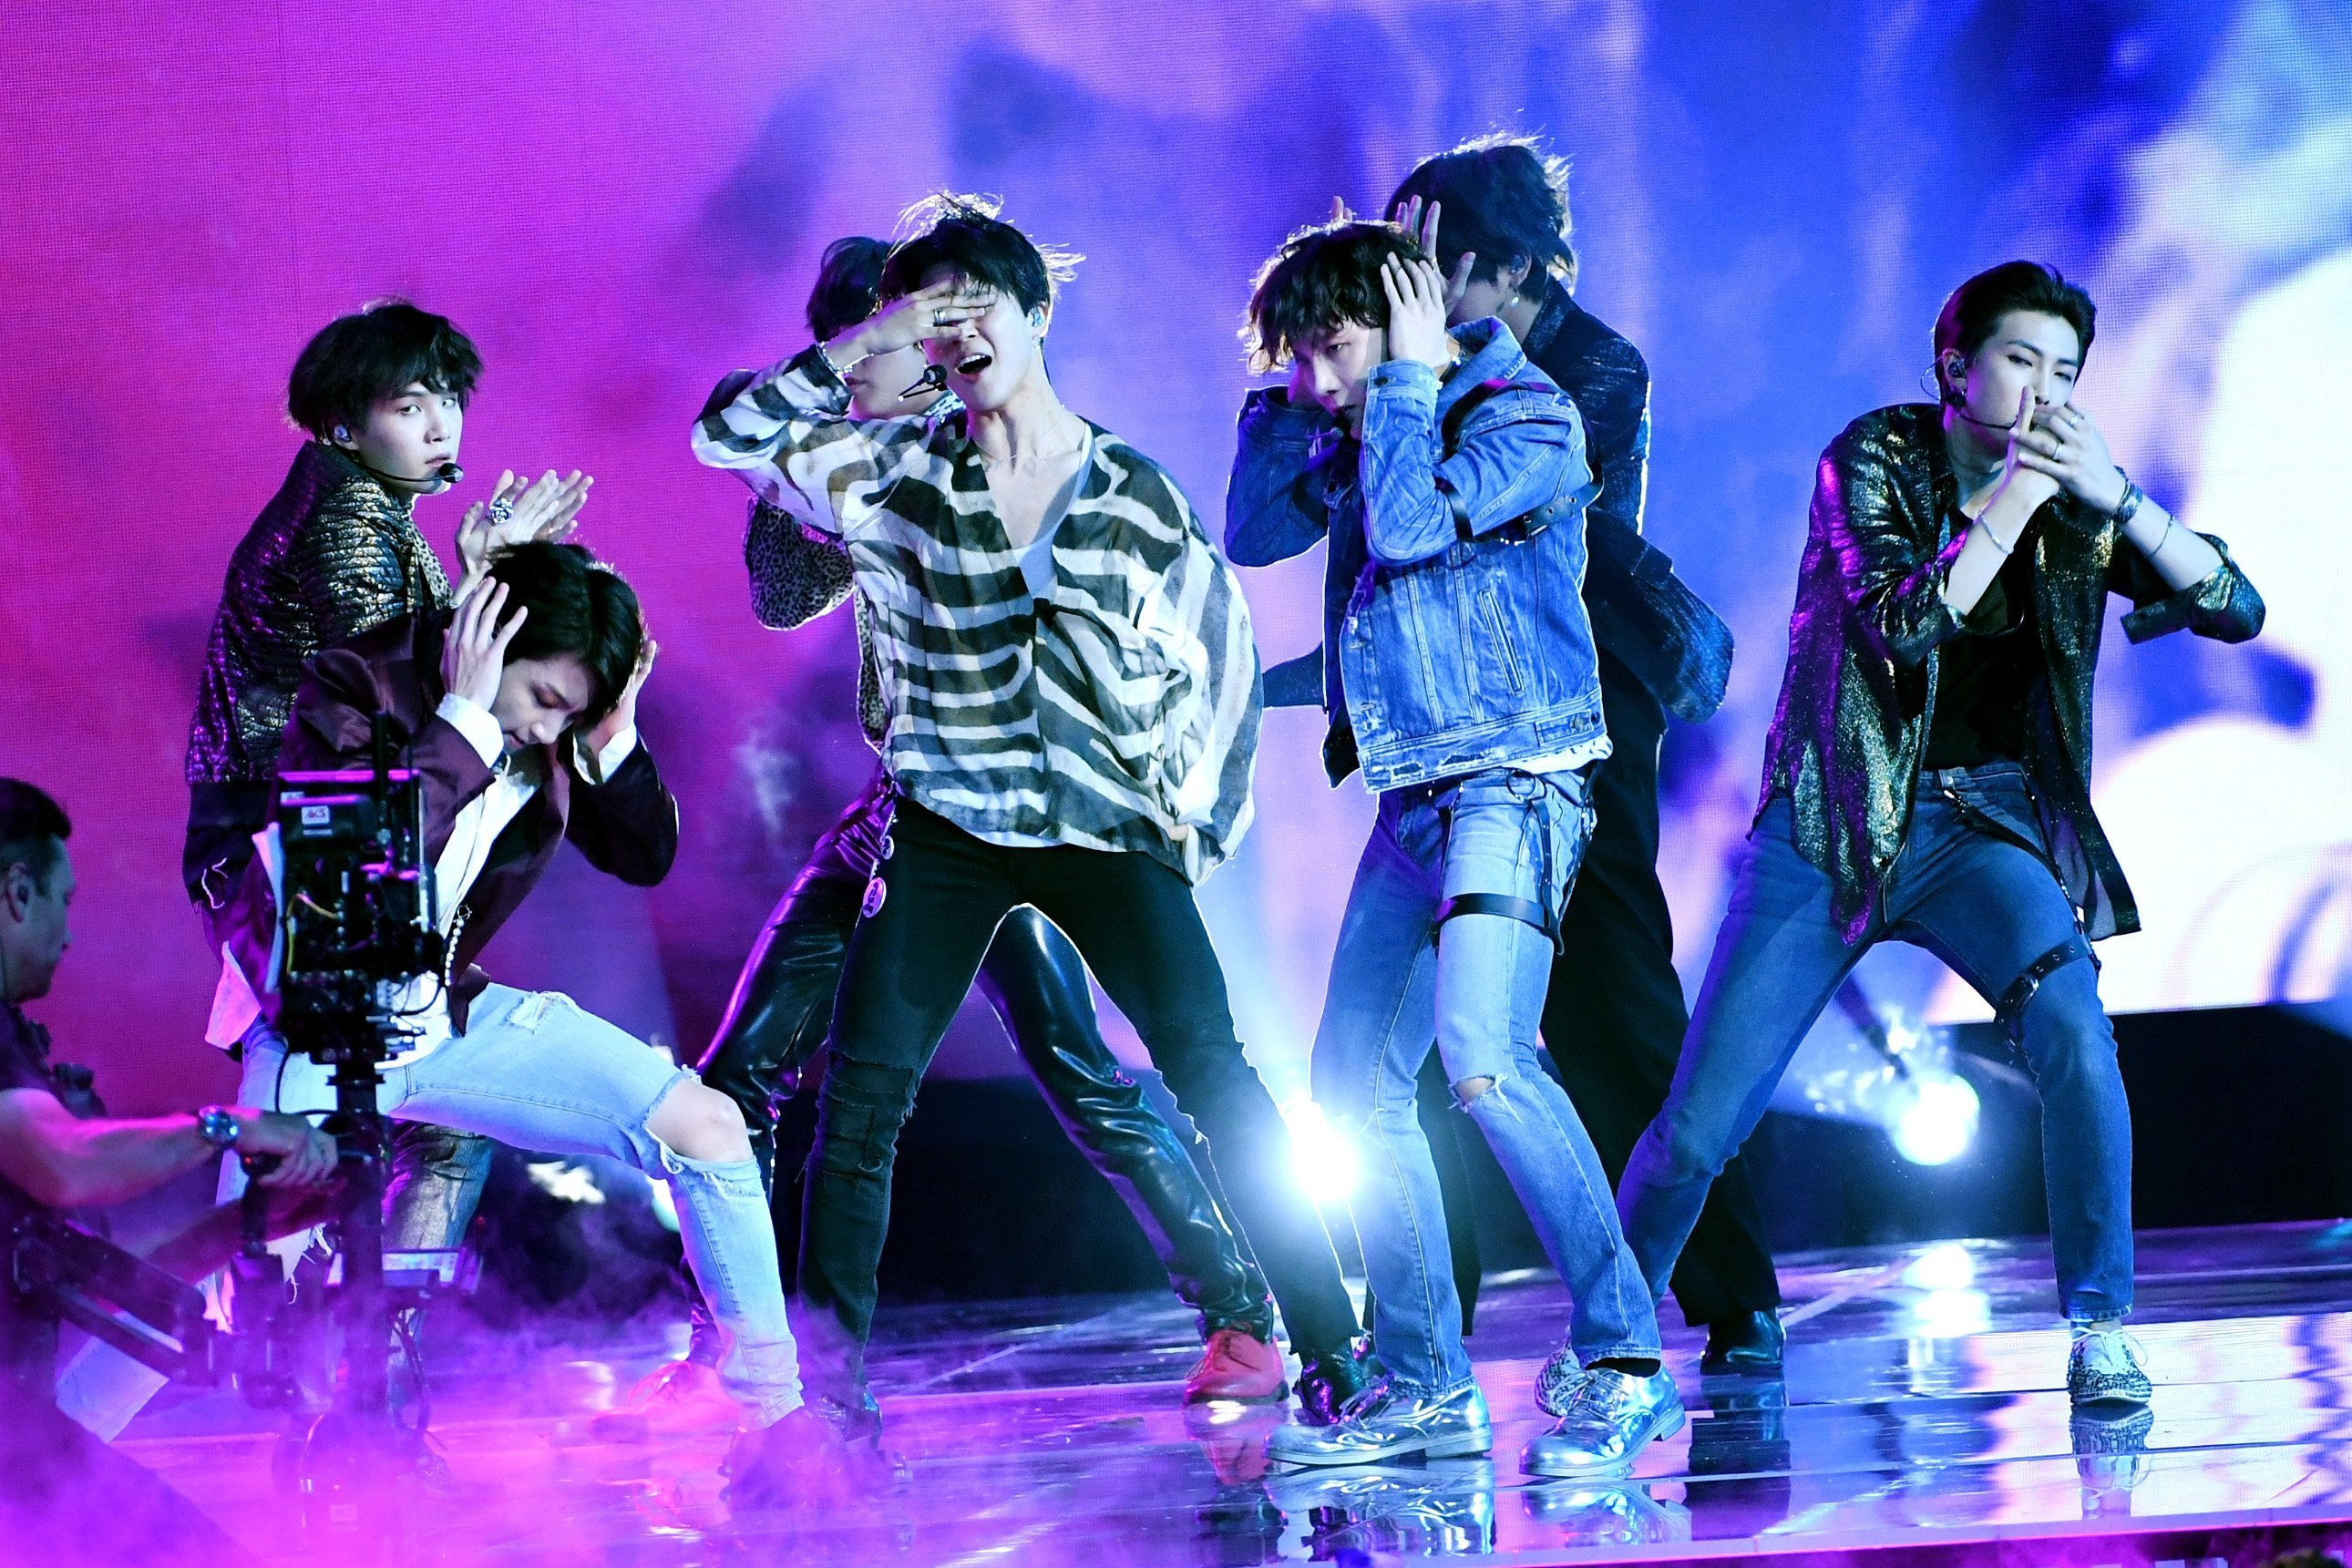 Foto Kpop Bts : Photos from Your Guide to K-Pop From BTS and Beyond - E ...